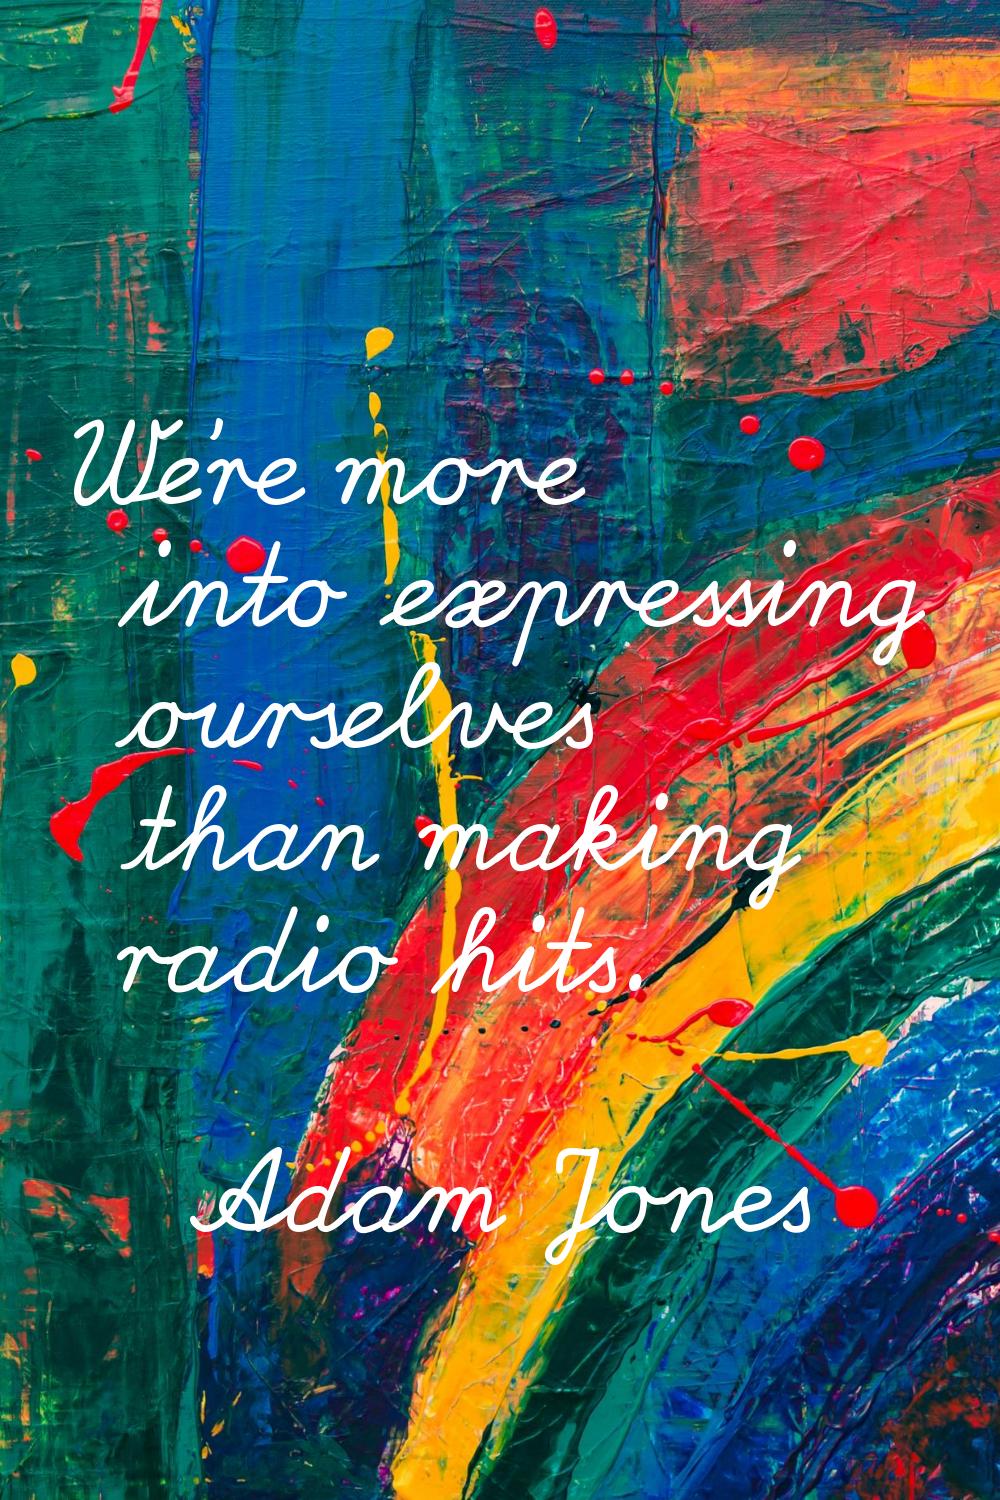 We're more into expressing ourselves than making radio hits.